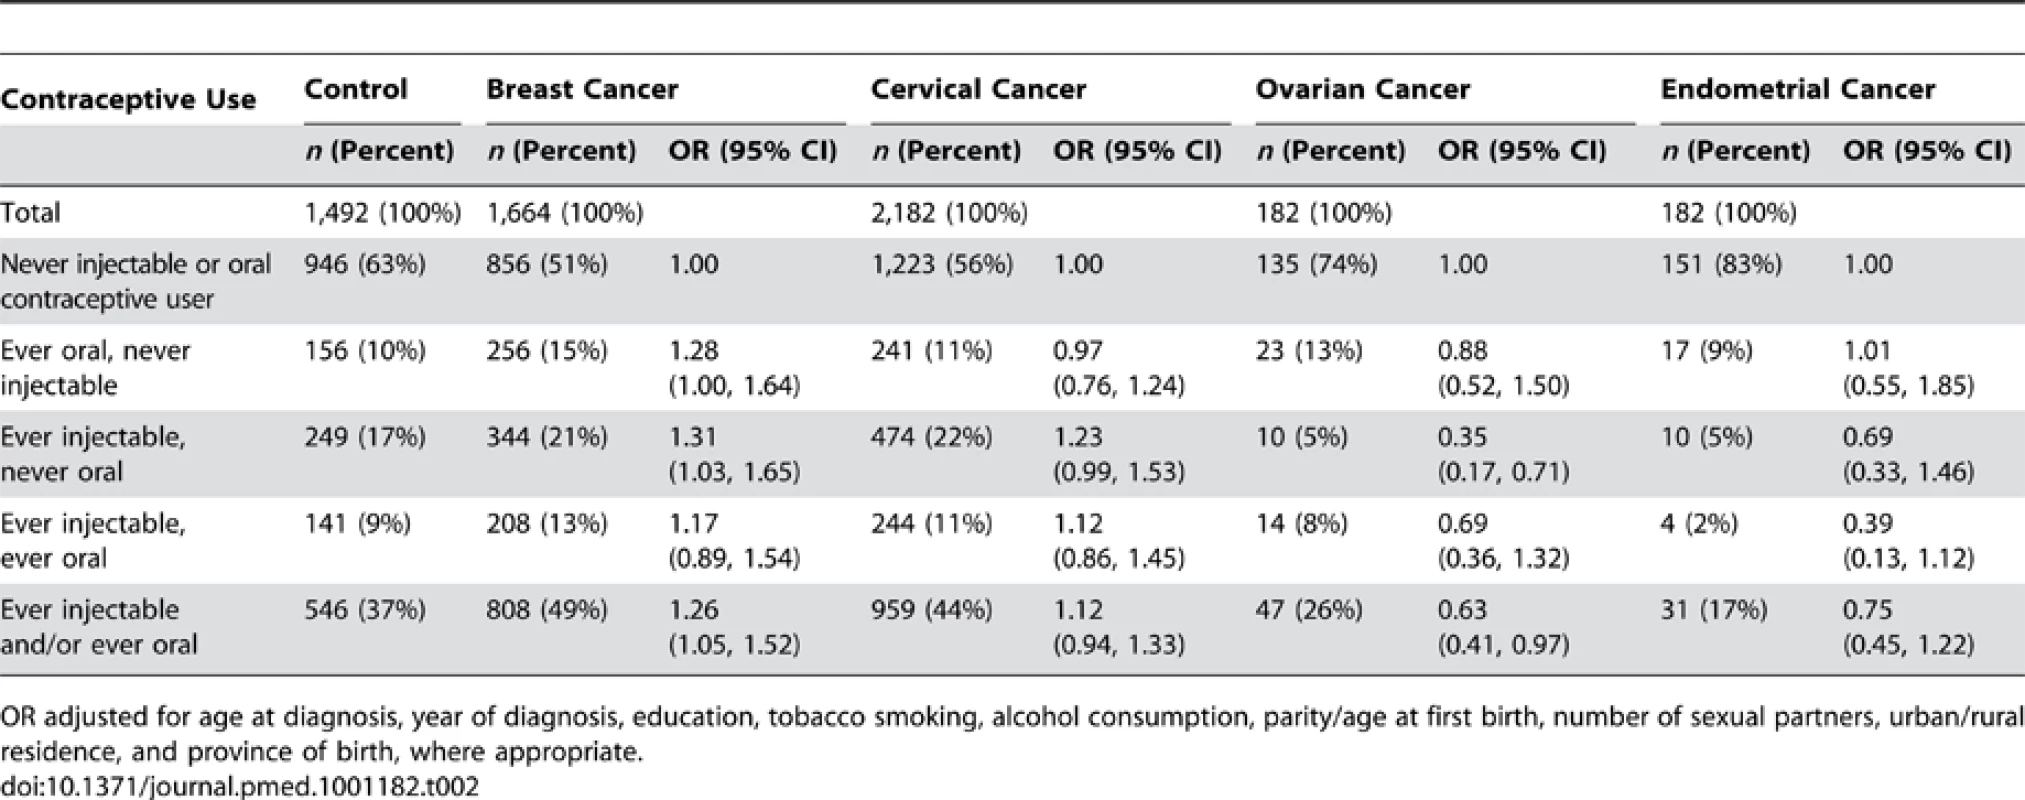 Frequencies and adjusted odds ratios for breast, cervical, ovarian, and endometrial cancer according to ever/never oral and injectable contraceptive use combinations.